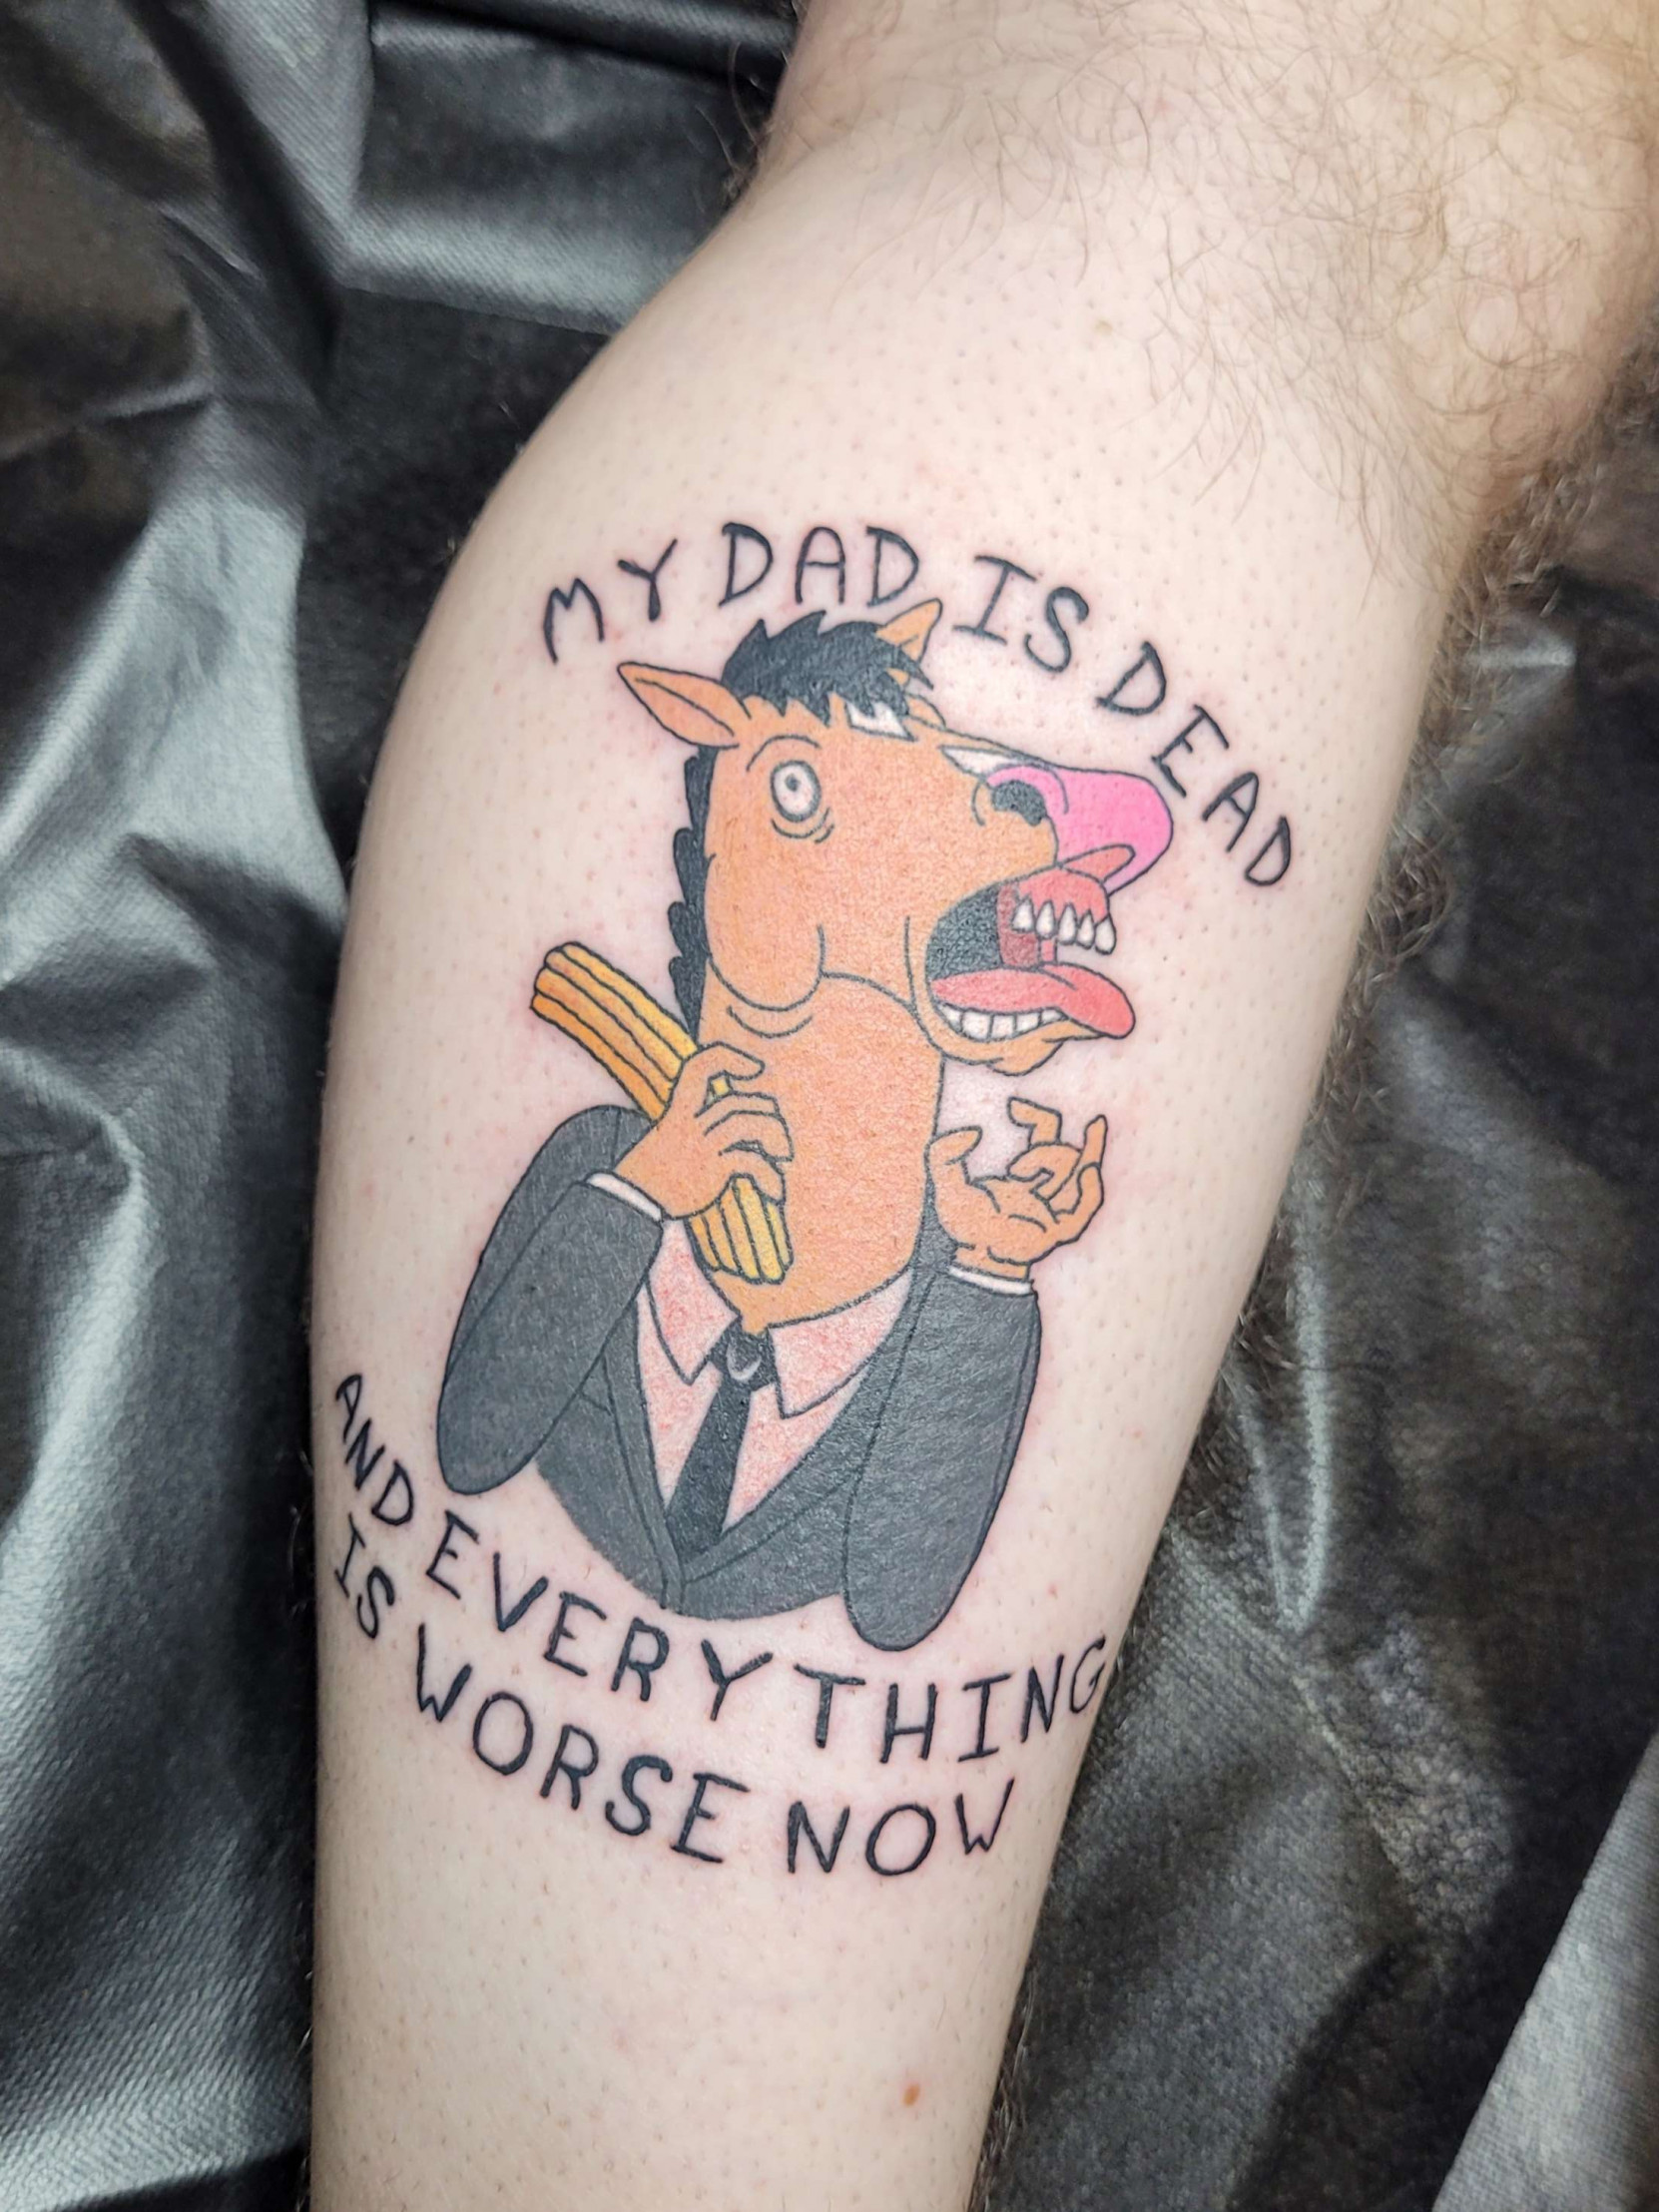 EightySix Tattoo Studio  Daz did this BoJack horseman tattoo yesterday A  little red in the picIve had to look up his name because Ive been  calling him boatface horse guy all